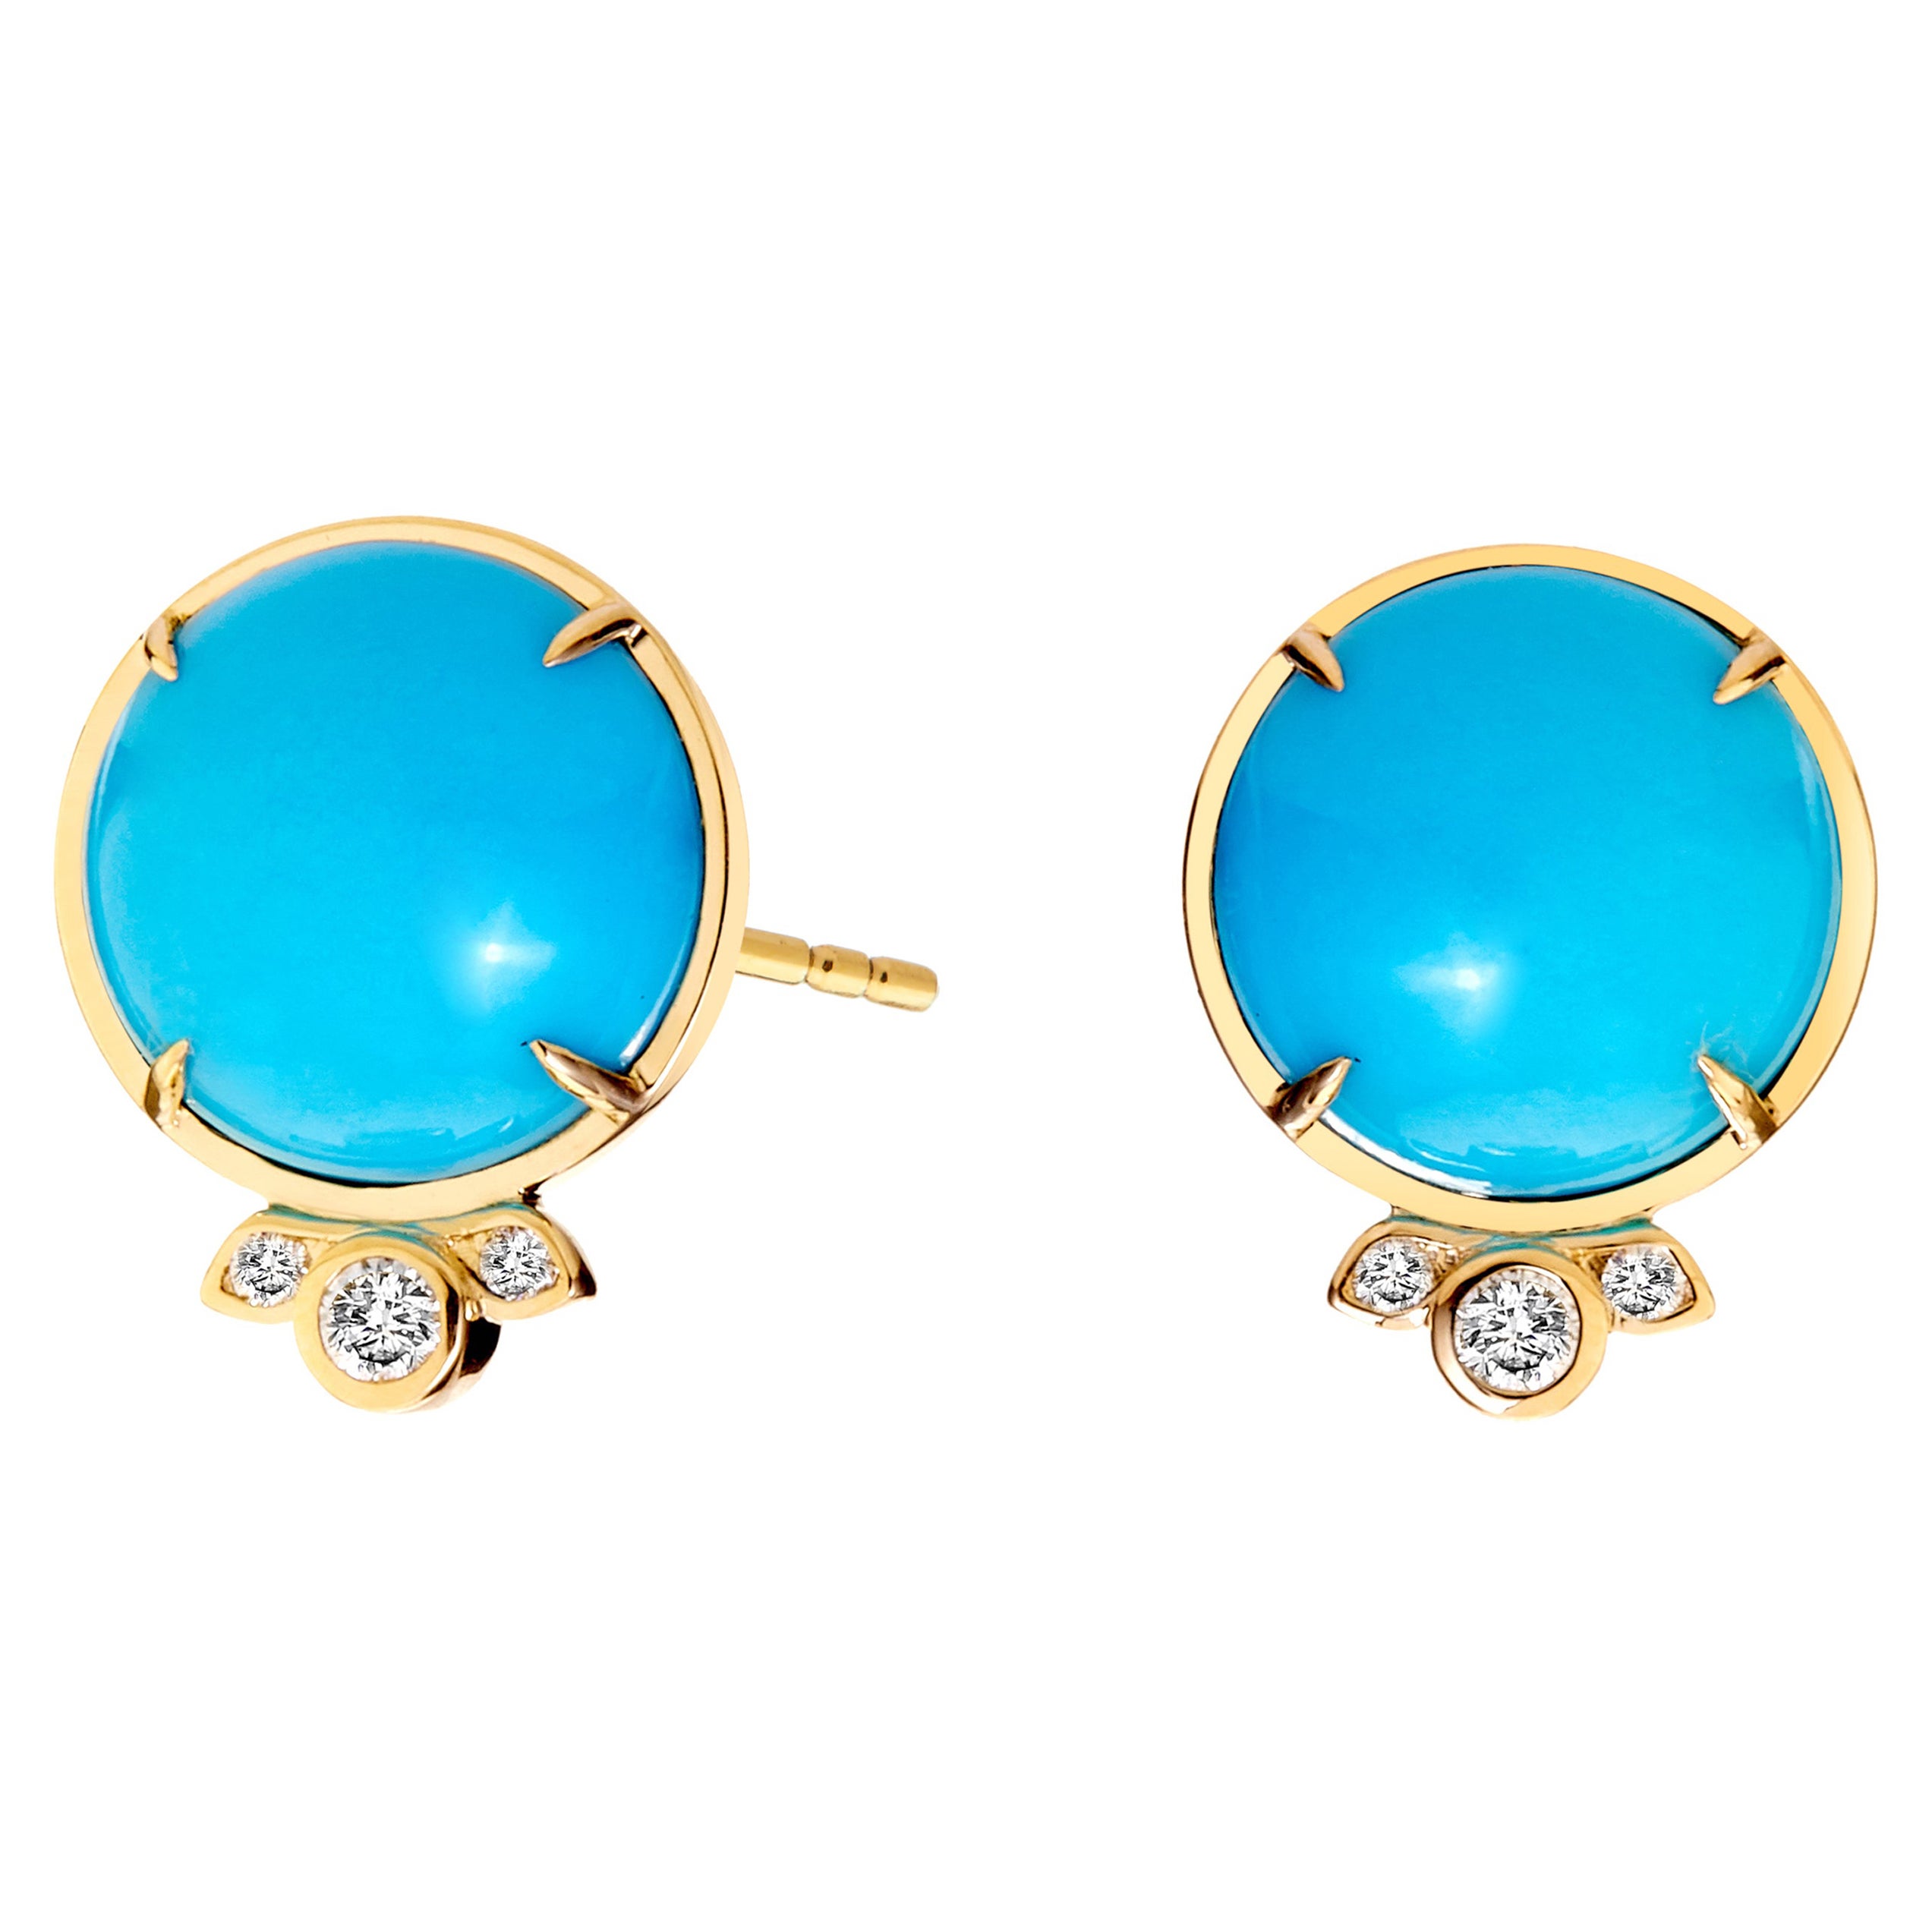 Syna Yellow Gold Sleeping Beauty Turquoise Earrings with Champagne Diamonds